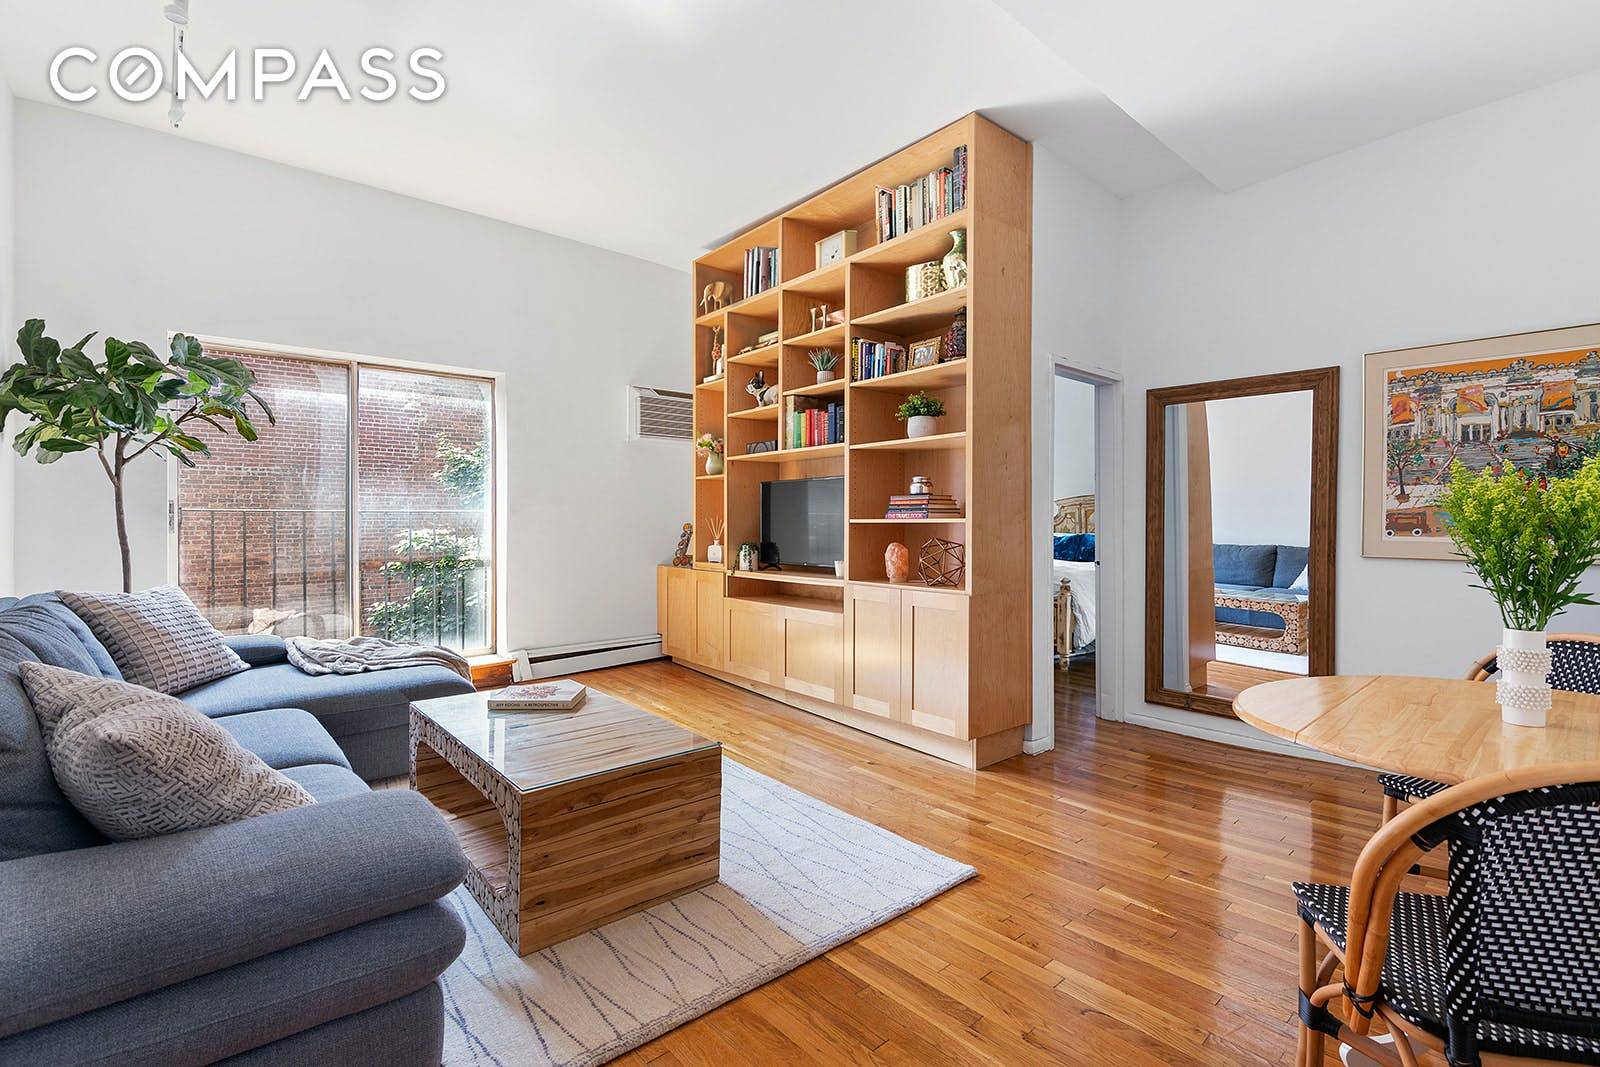 This charming 1 bedroom co op, set in a meticulously maintained elevator building in the heart of Brooklyn Heights, is the unit you have been searching for.